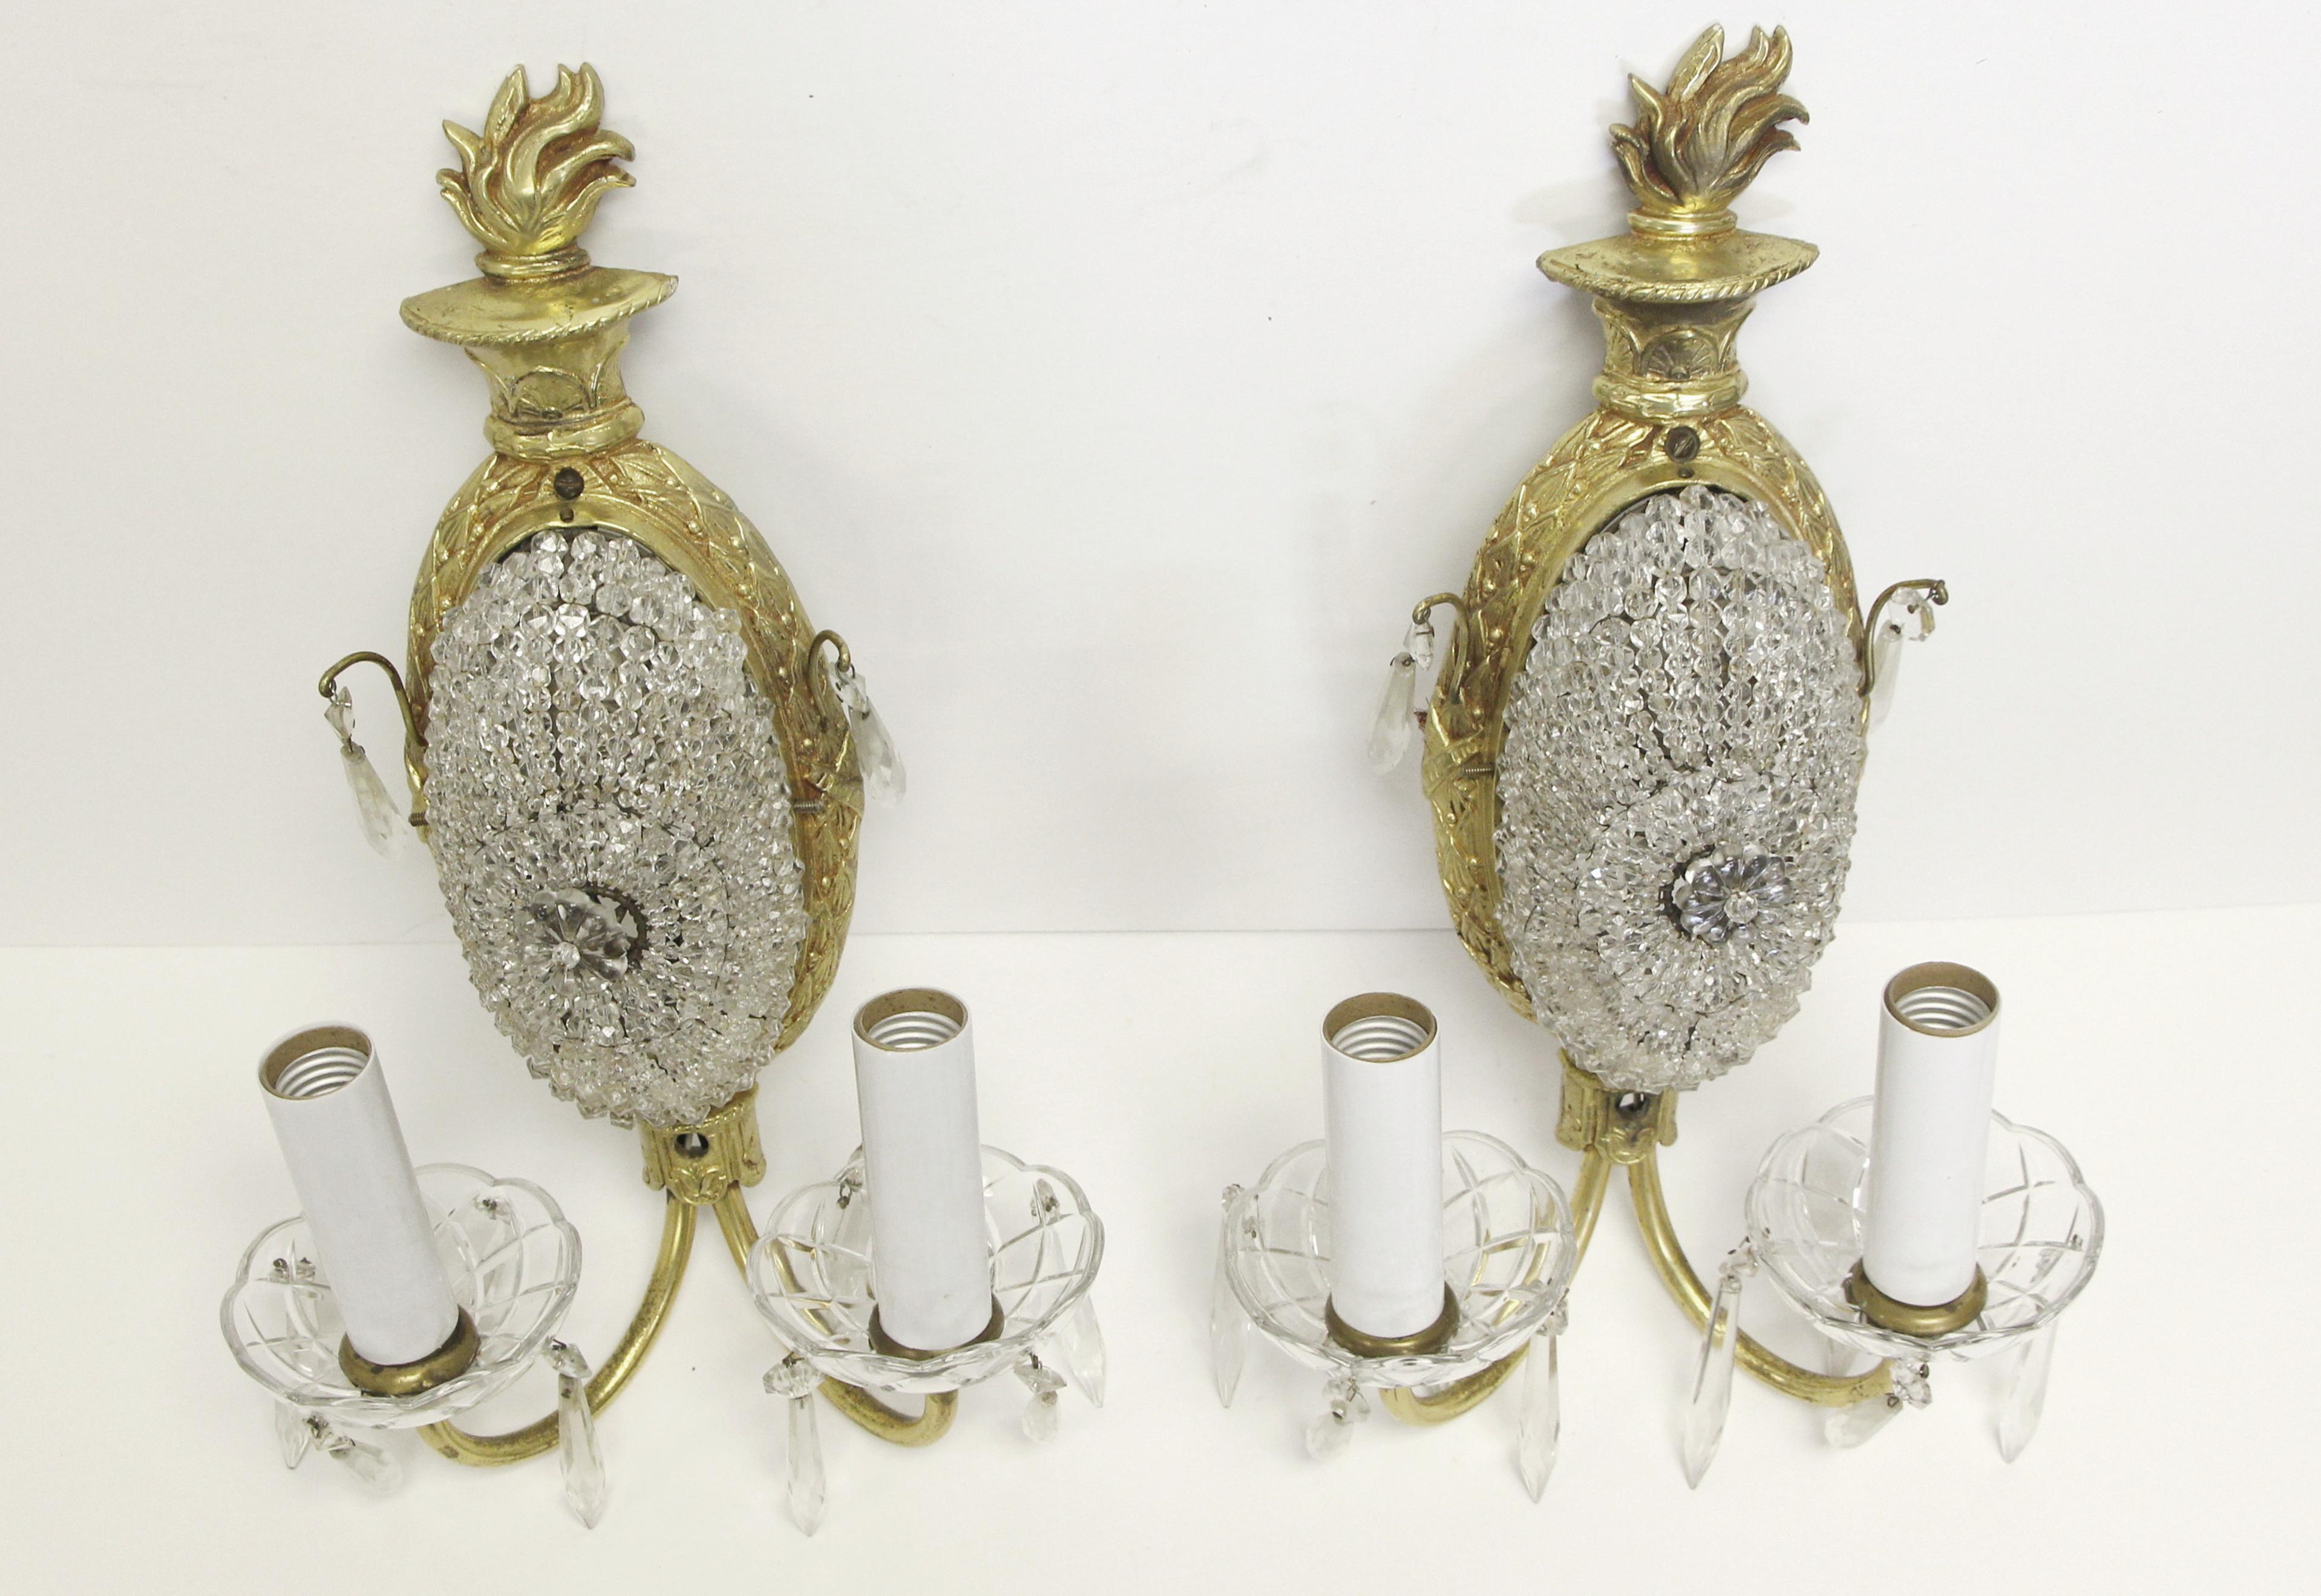 1900s pair of two arm sconces made of beaded crystal gold gilded bronze from France. These sconces were recently fully restored. Priced as a pair. Please note, this item is located in our Scranton, PA location.